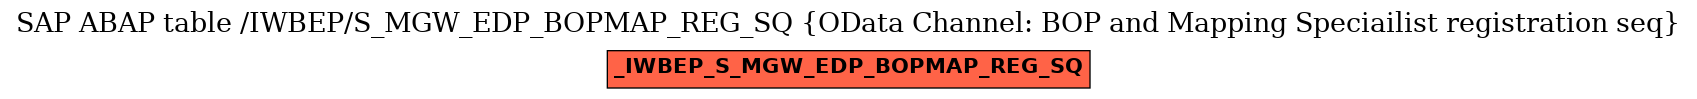 E-R Diagram for table /IWBEP/S_MGW_EDP_BOPMAP_REG_SQ (OData Channel: BOP and Mapping Speciailist registration seq)